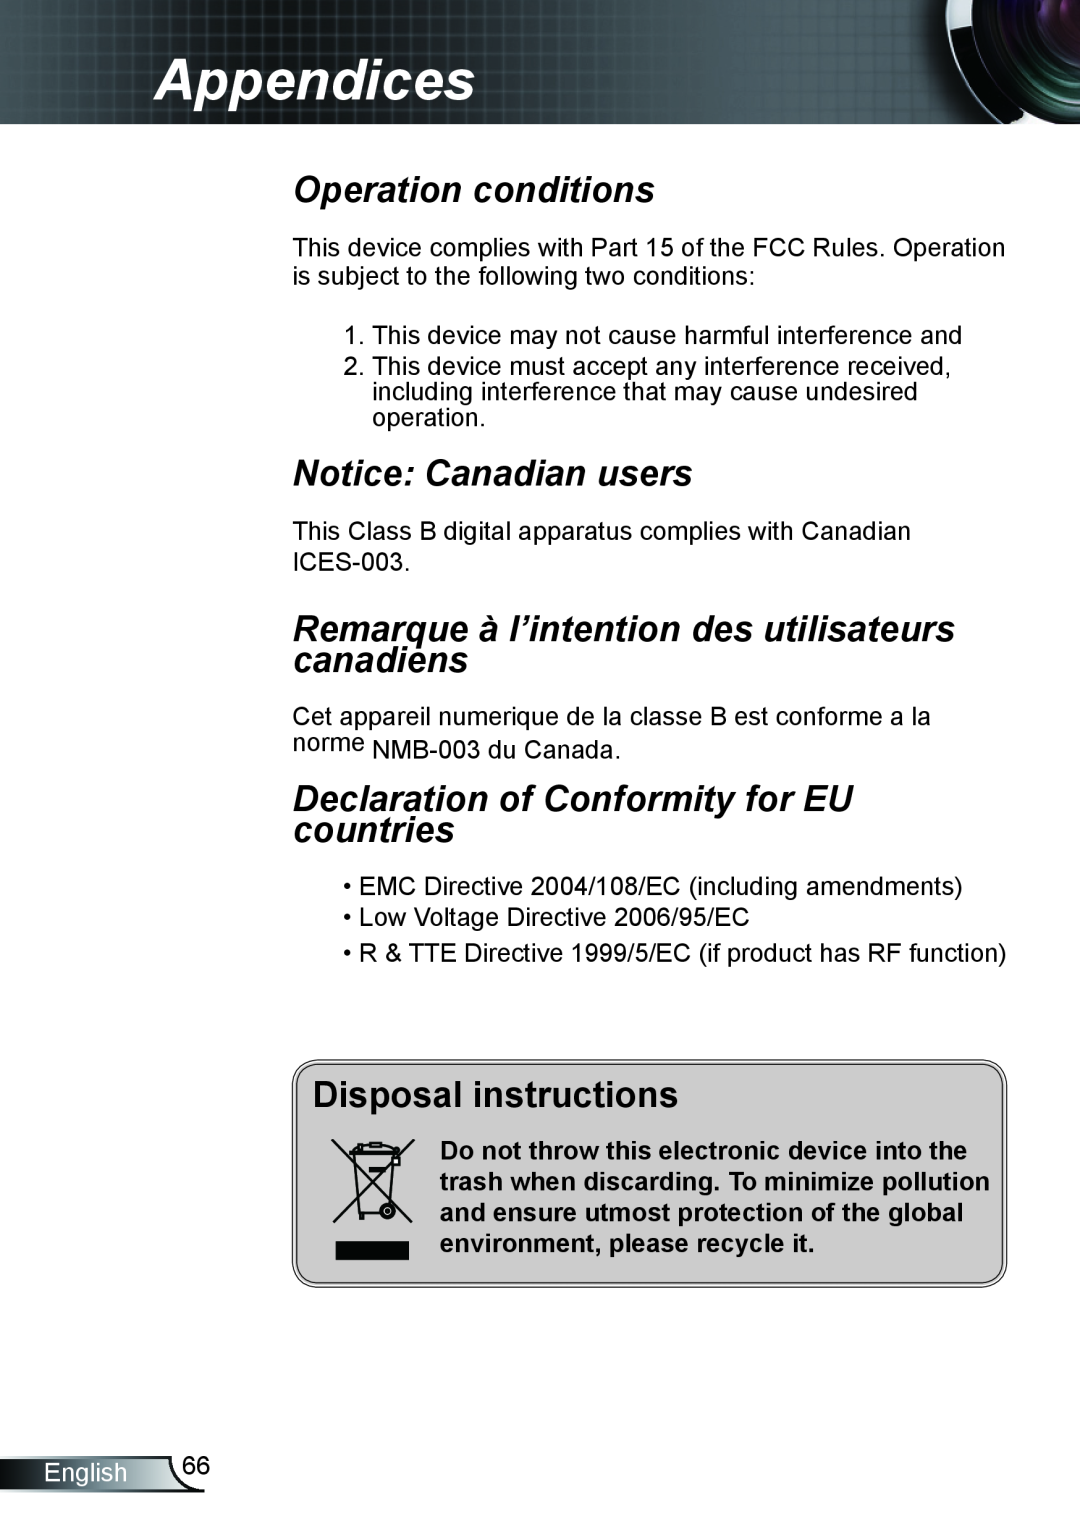 Optoma Technology TX610ST Operation conditions, Notice Canadian users, Remarque à l’intention des utilisateurs canadiens 